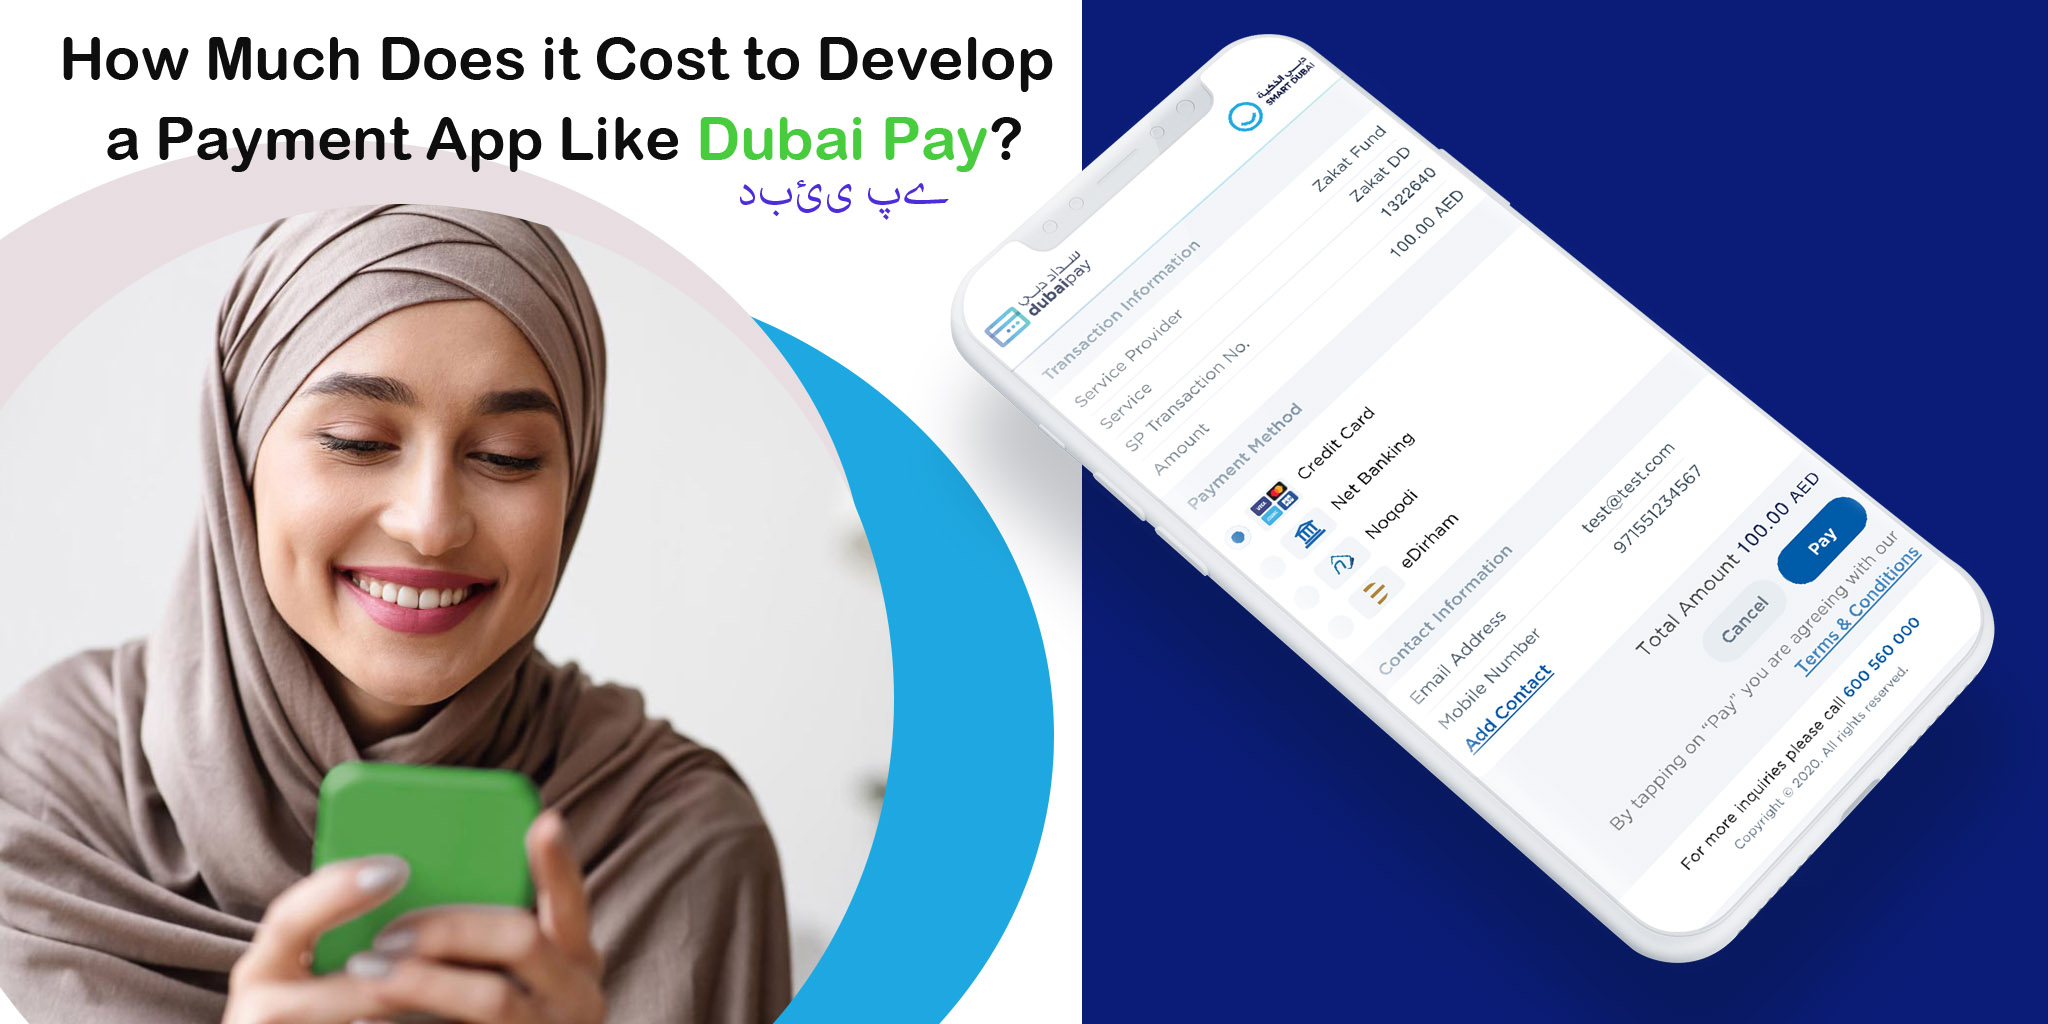 How Much Does it Cost to Develop a Payment App Like Dubai Pay?